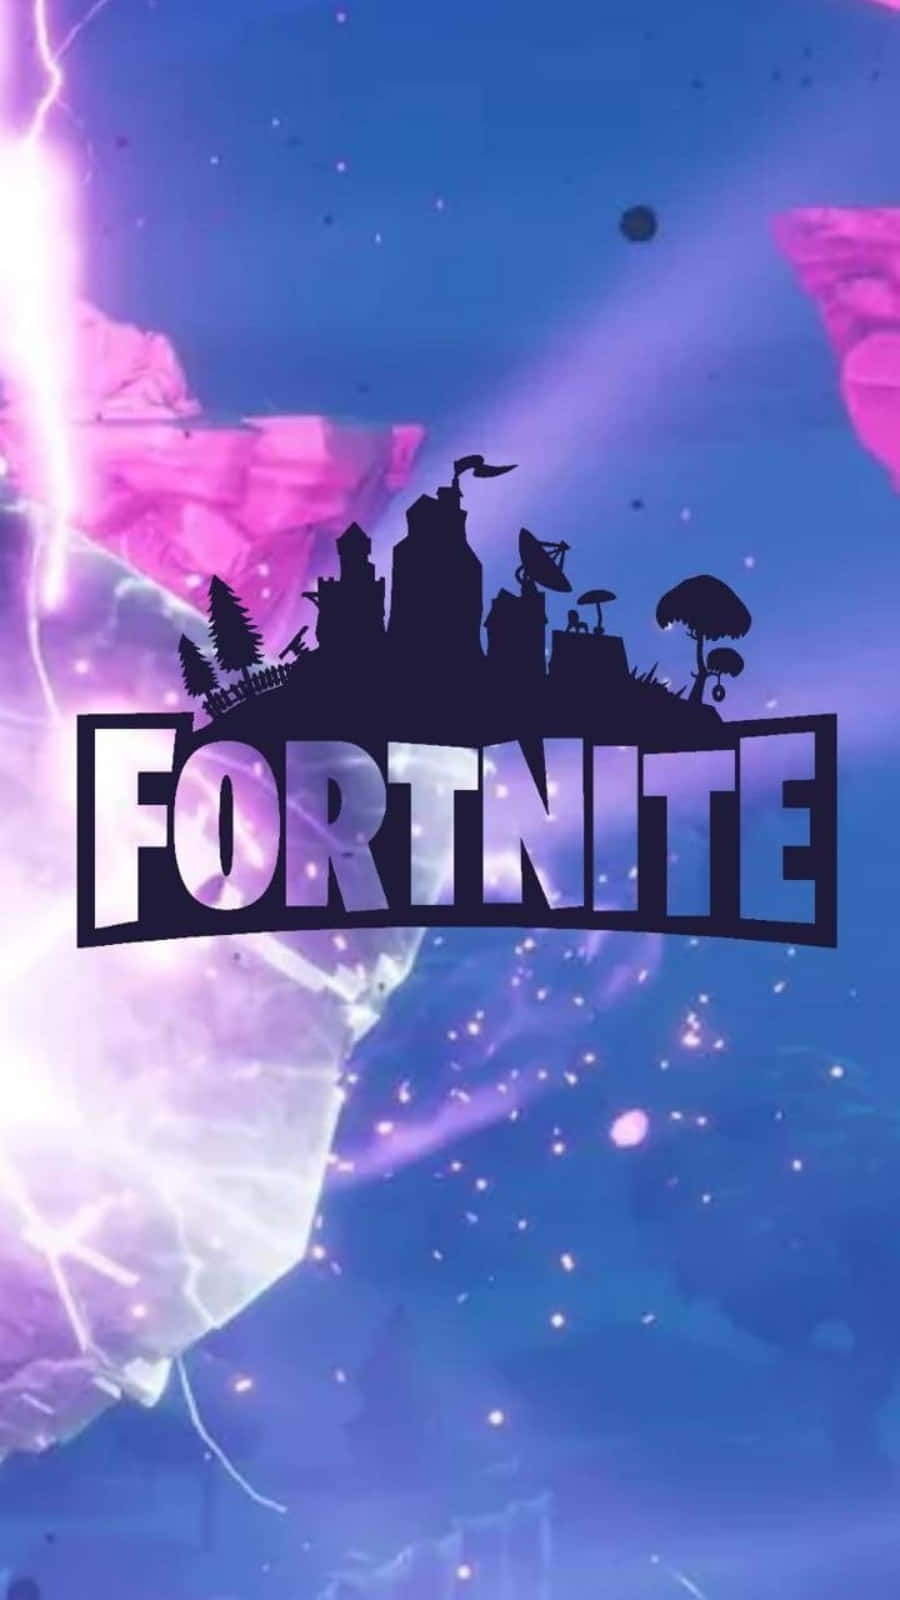 Show Off Your Cool Fortnite Logo! Wallpaper